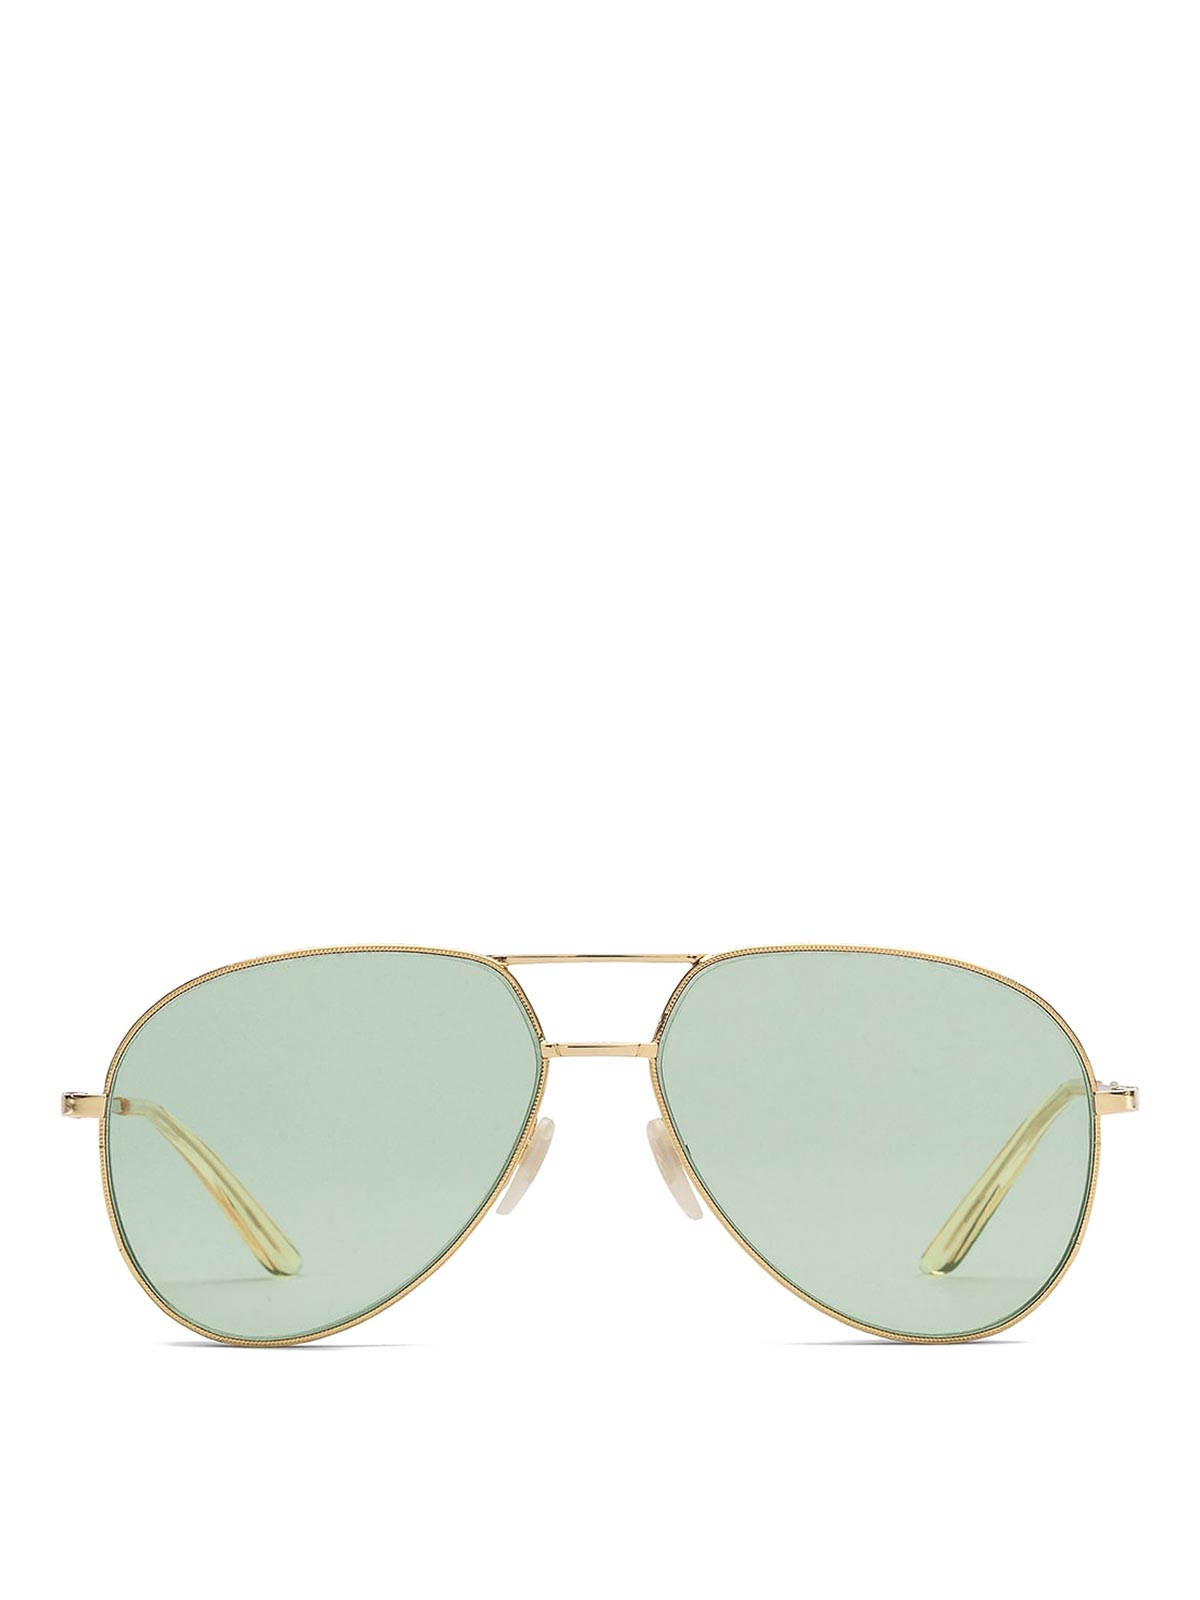 Gucci Eyeglasses In Gold